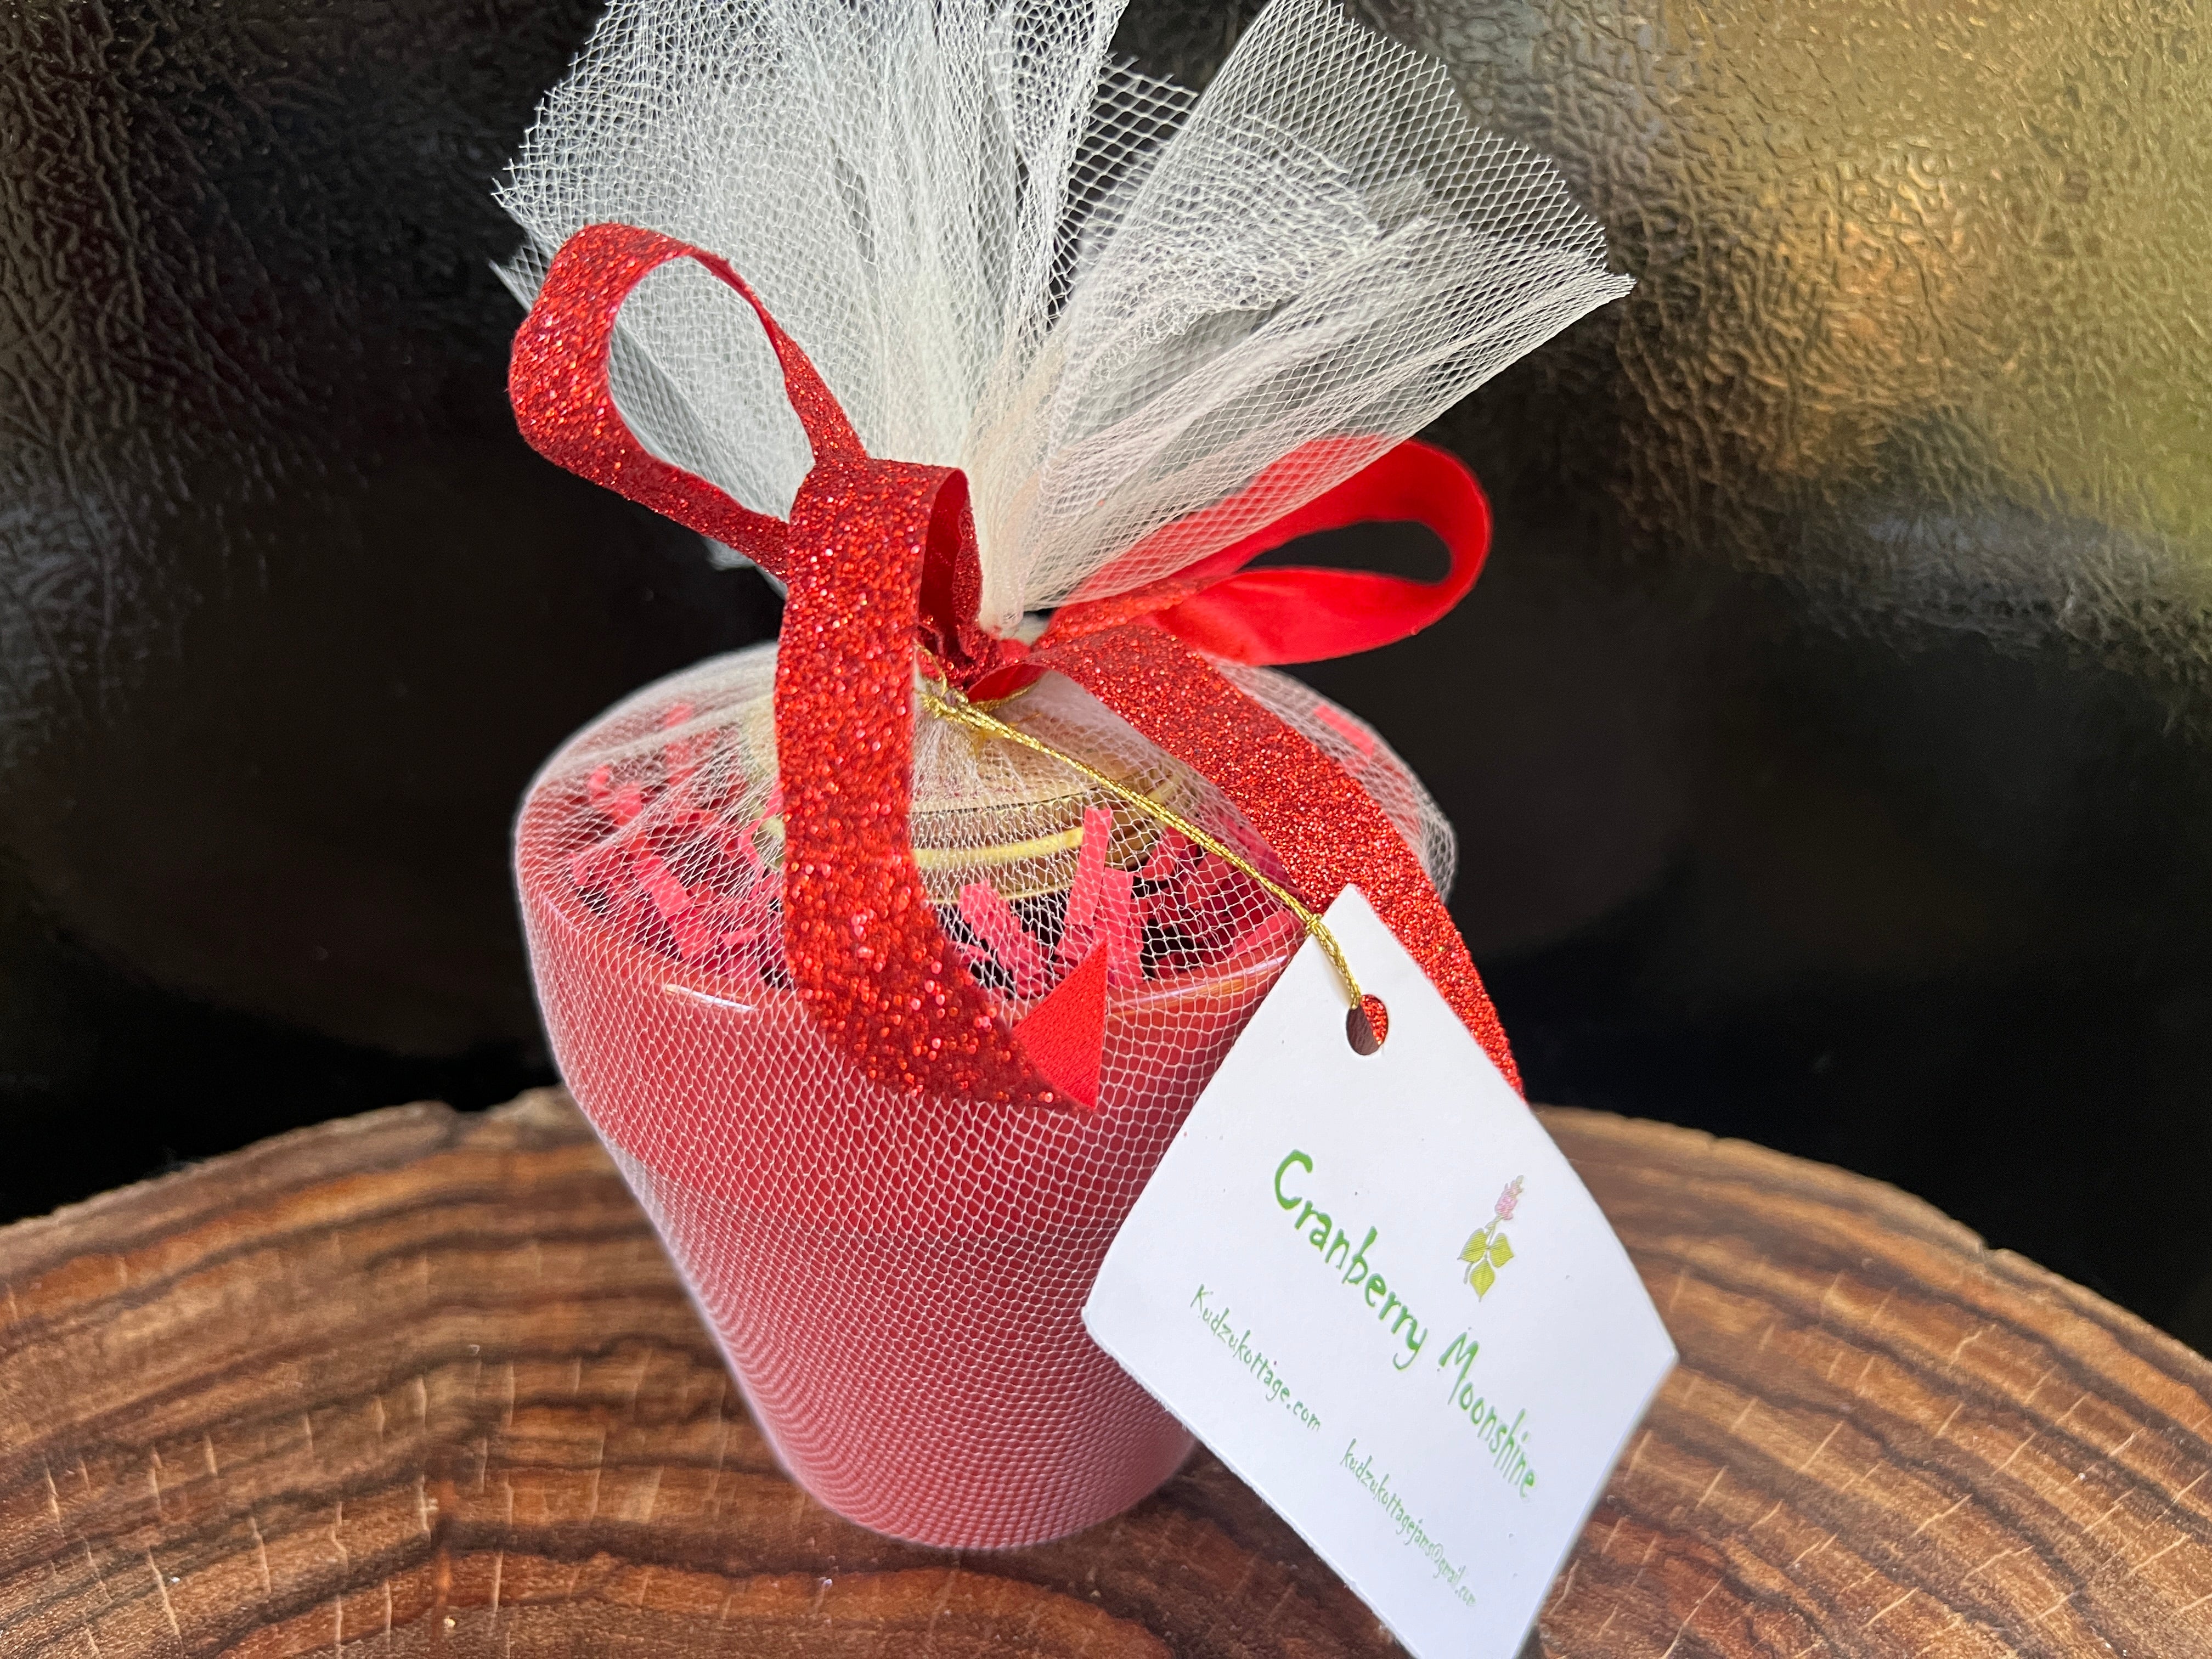 White Chocolate Raspberry Kahlua in a Red Flower Pot